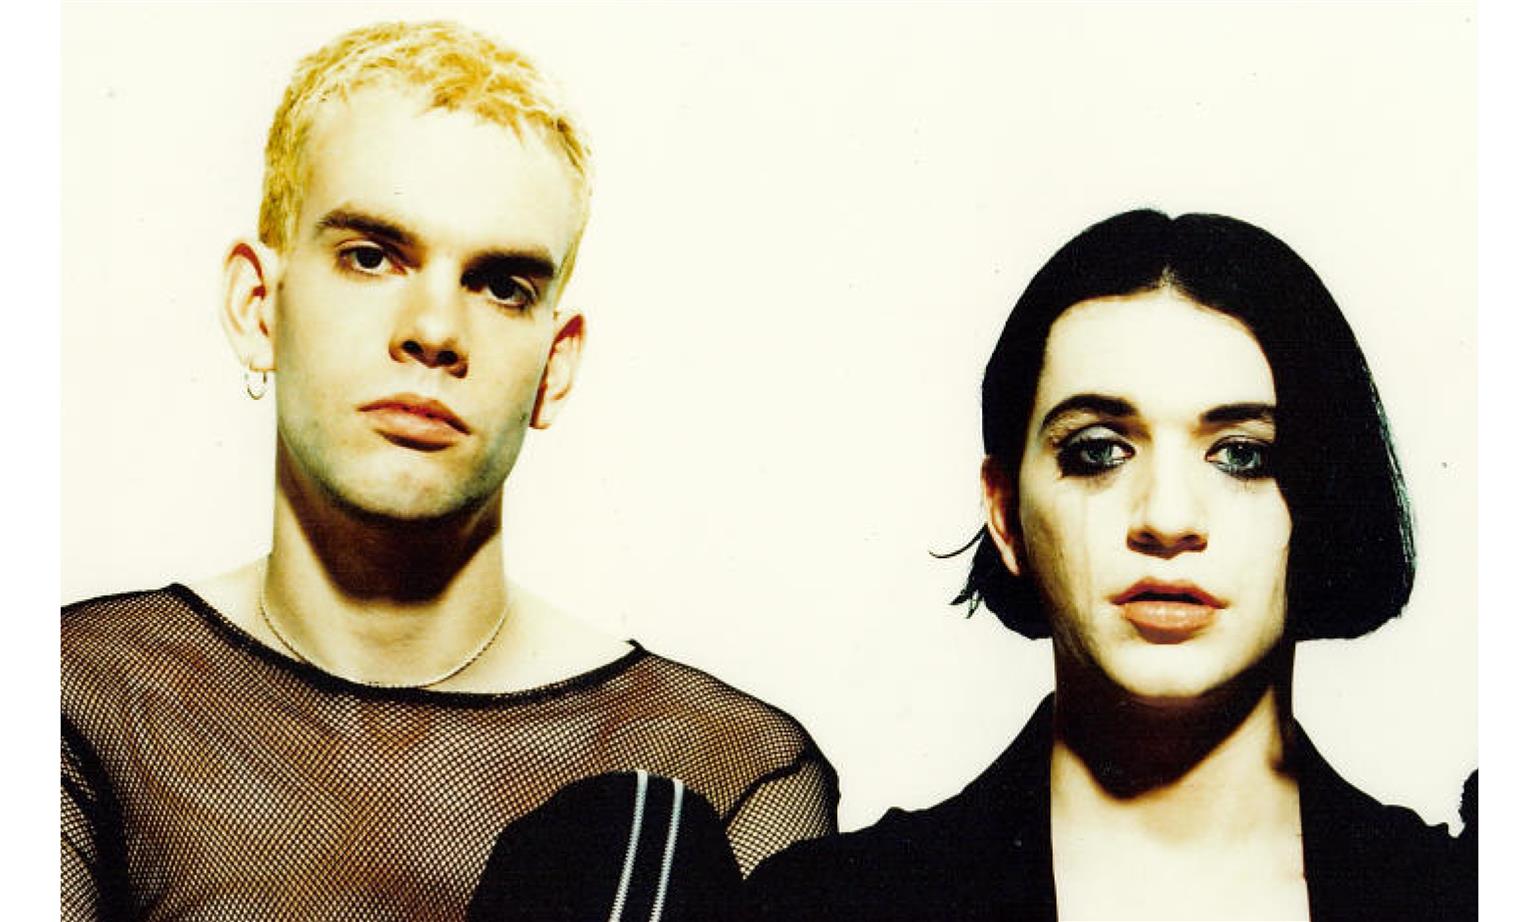 Placebo guitarist got death threats in Russia for being gay